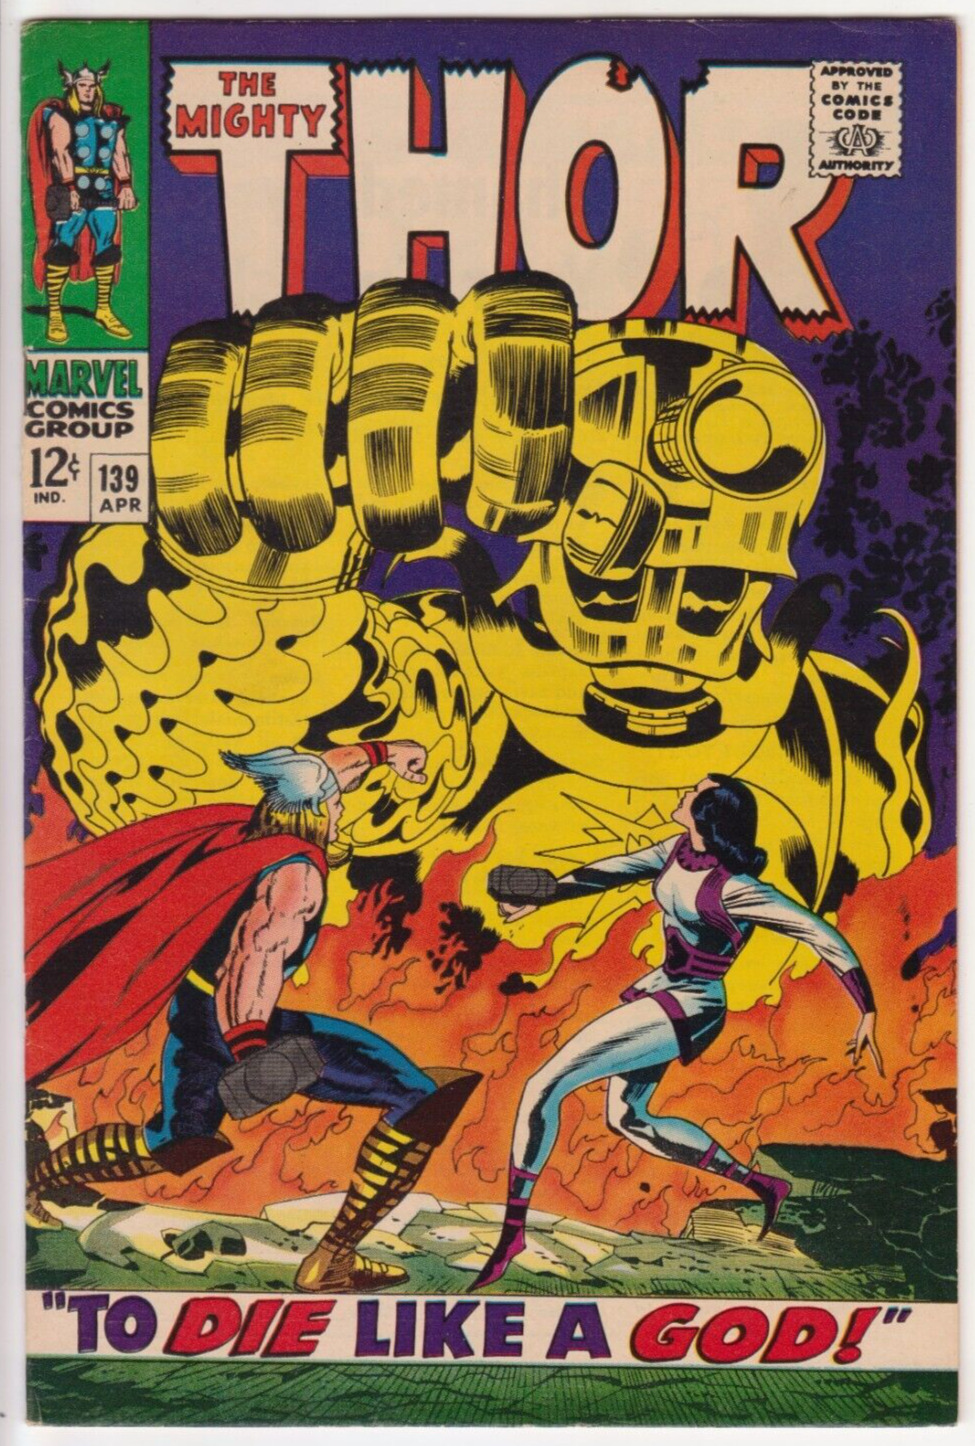 The Mighty Thor #139, Marvel Comics 1967 VF 8.0 Stan Lee and Jack Kirby